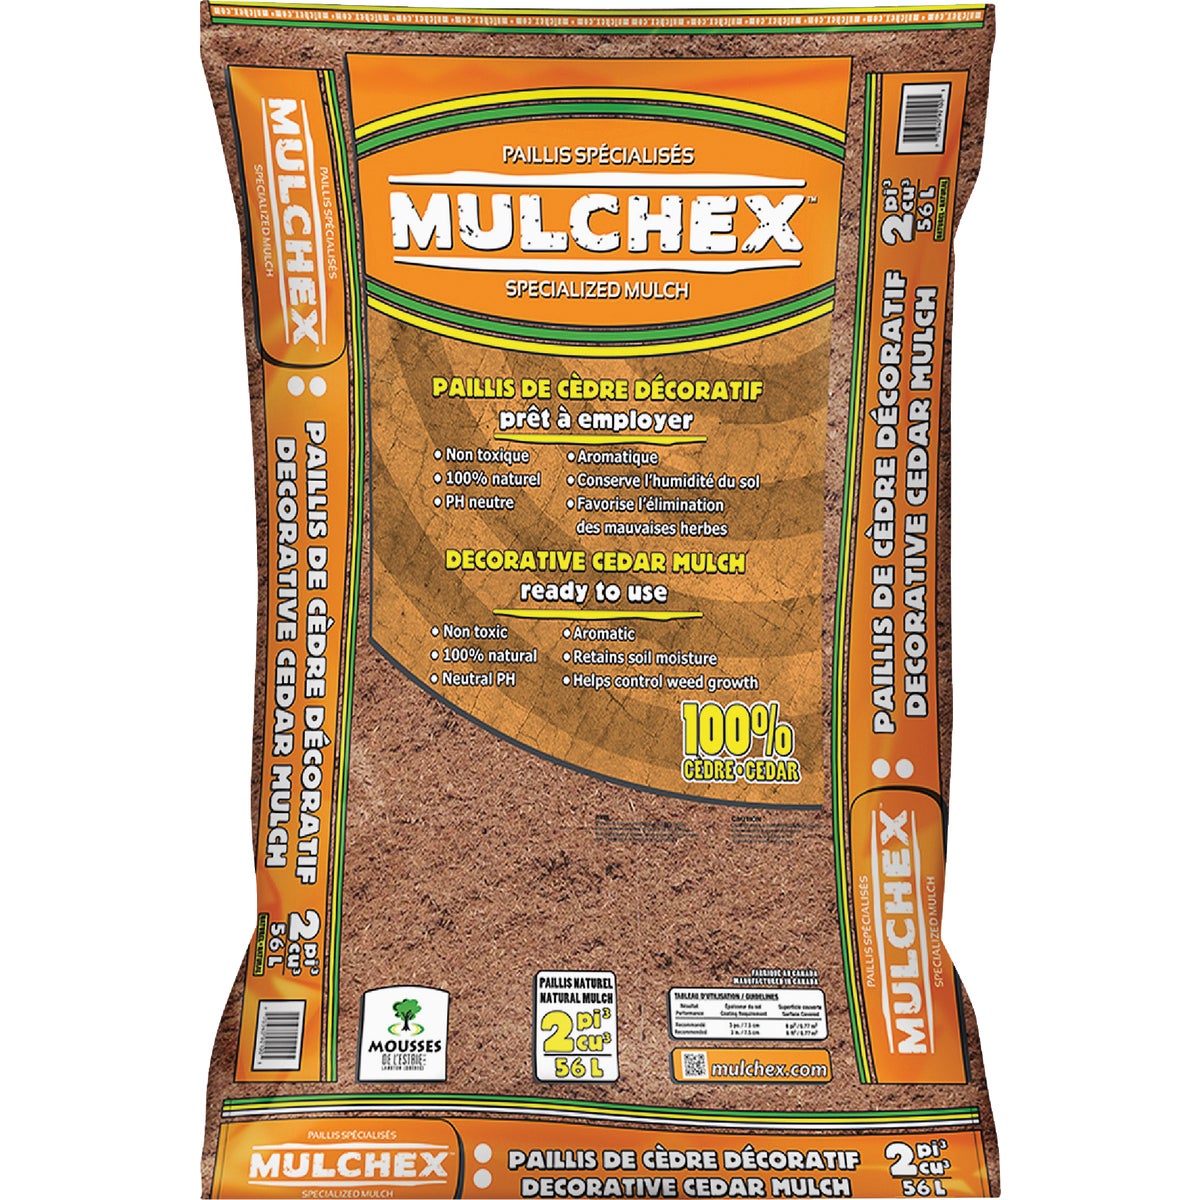 Item 731202, Cedar mulch ideal for landscaping and gardens.